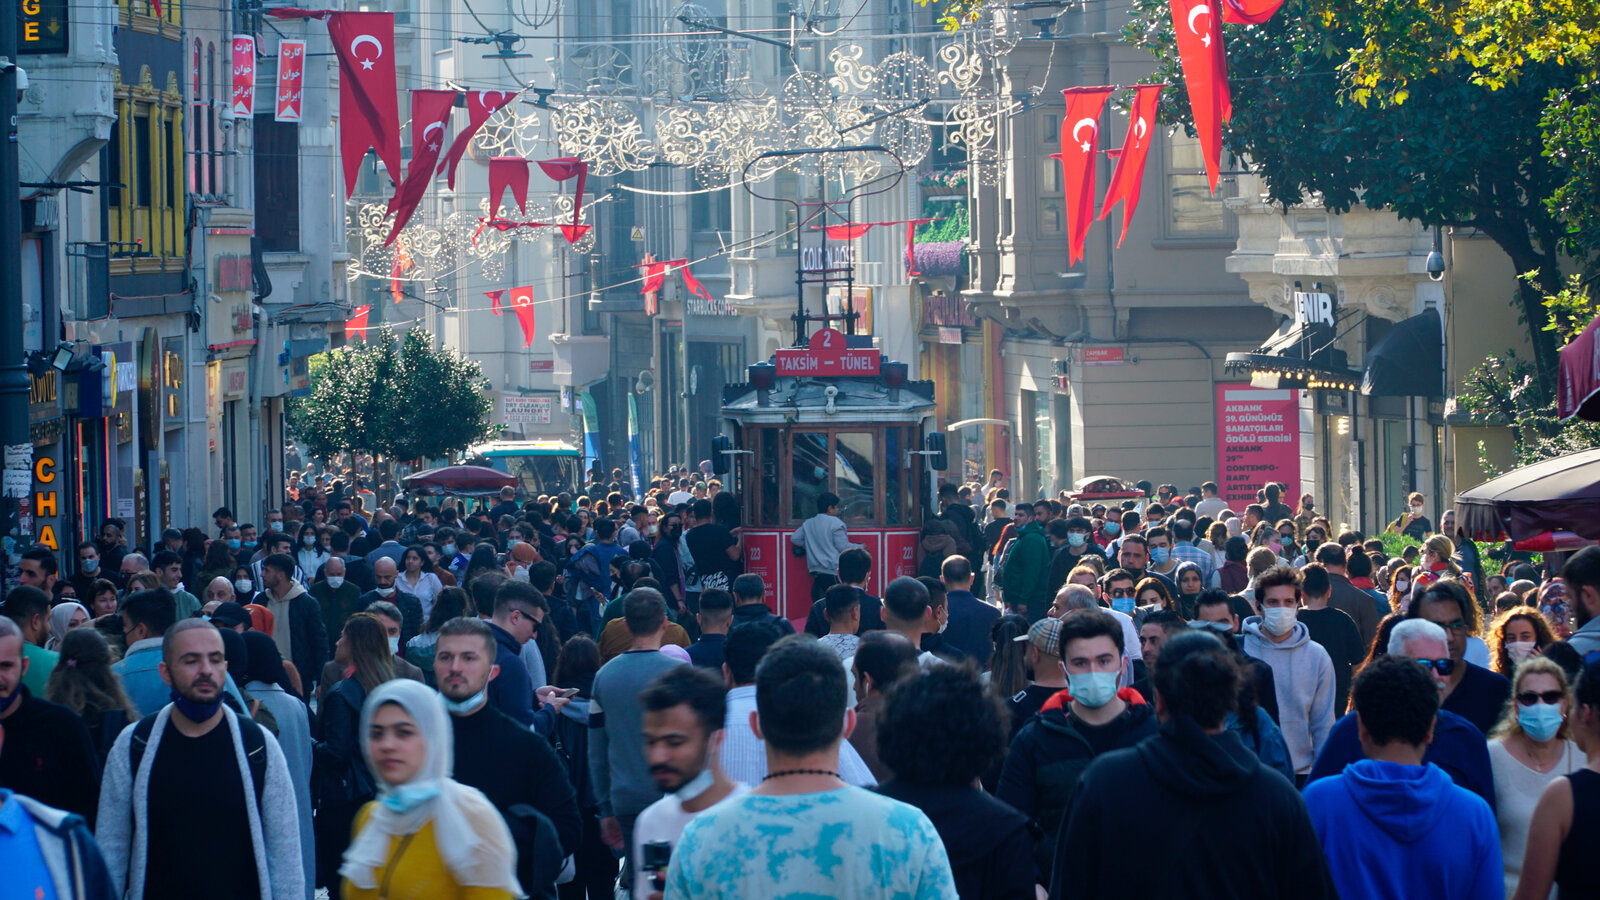 Turkey Has Increased the Key Rate. What Does This Mean for Investors?